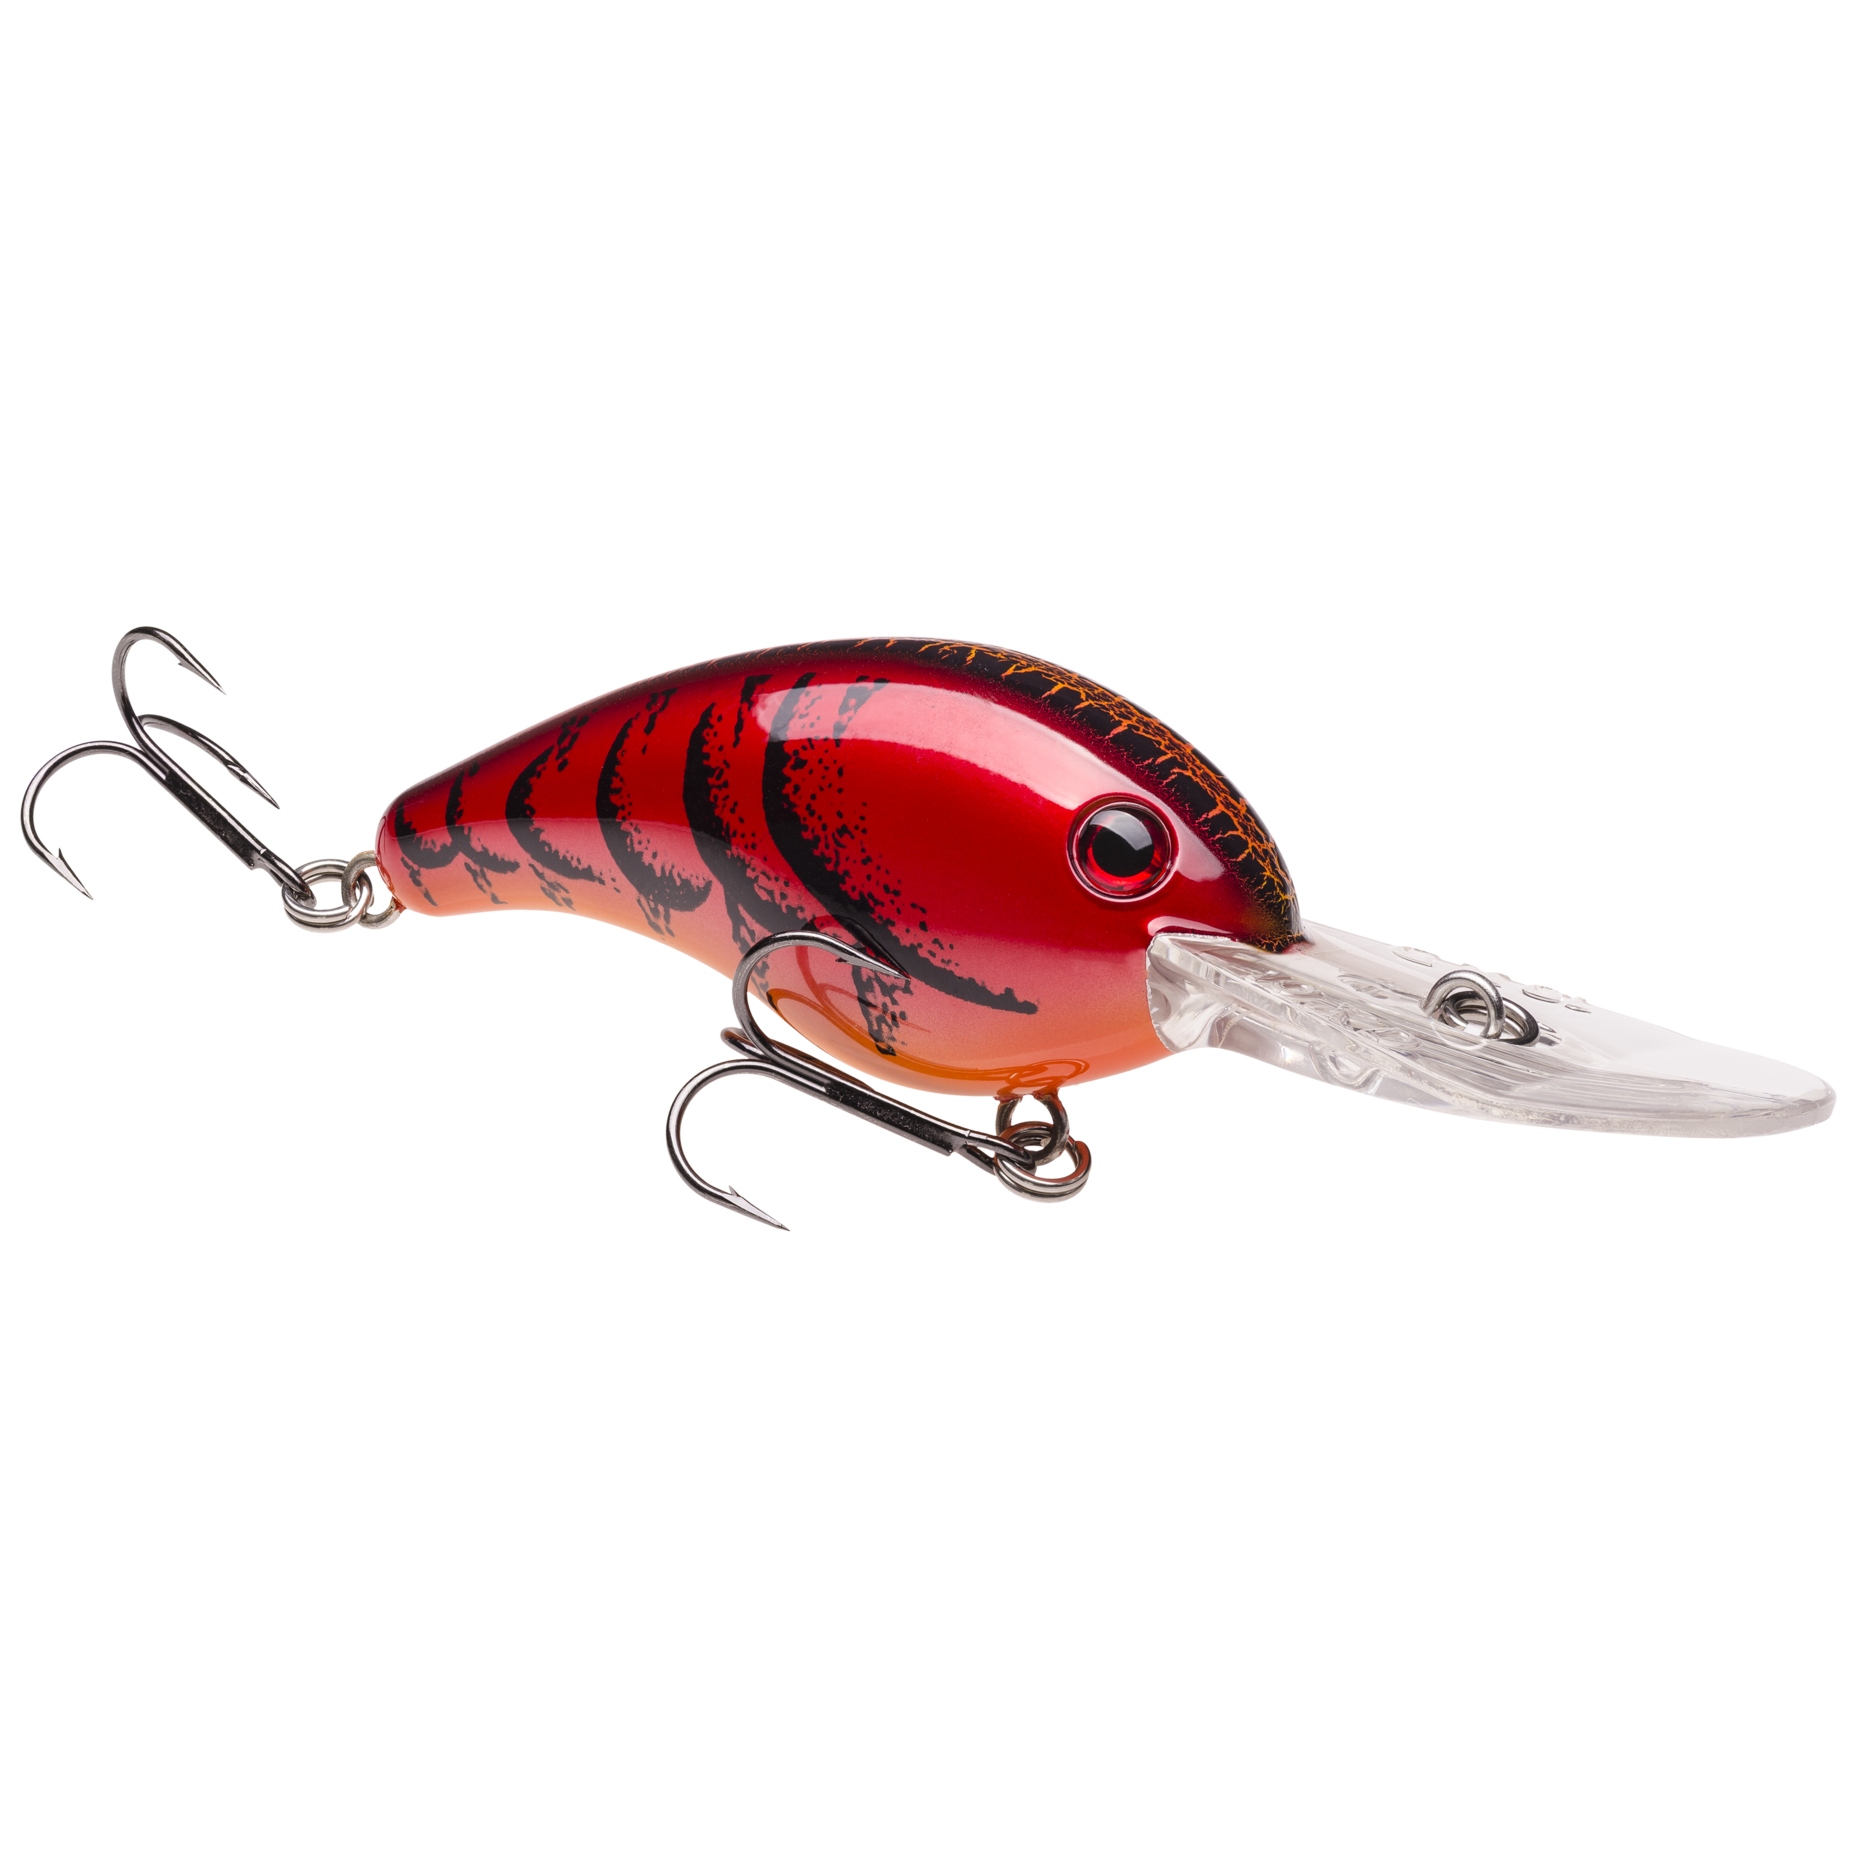 NEW ABT X-2 COUNTDOWN GOES WHERE NO OTHER DEEP-DIVING CRANKBAIT